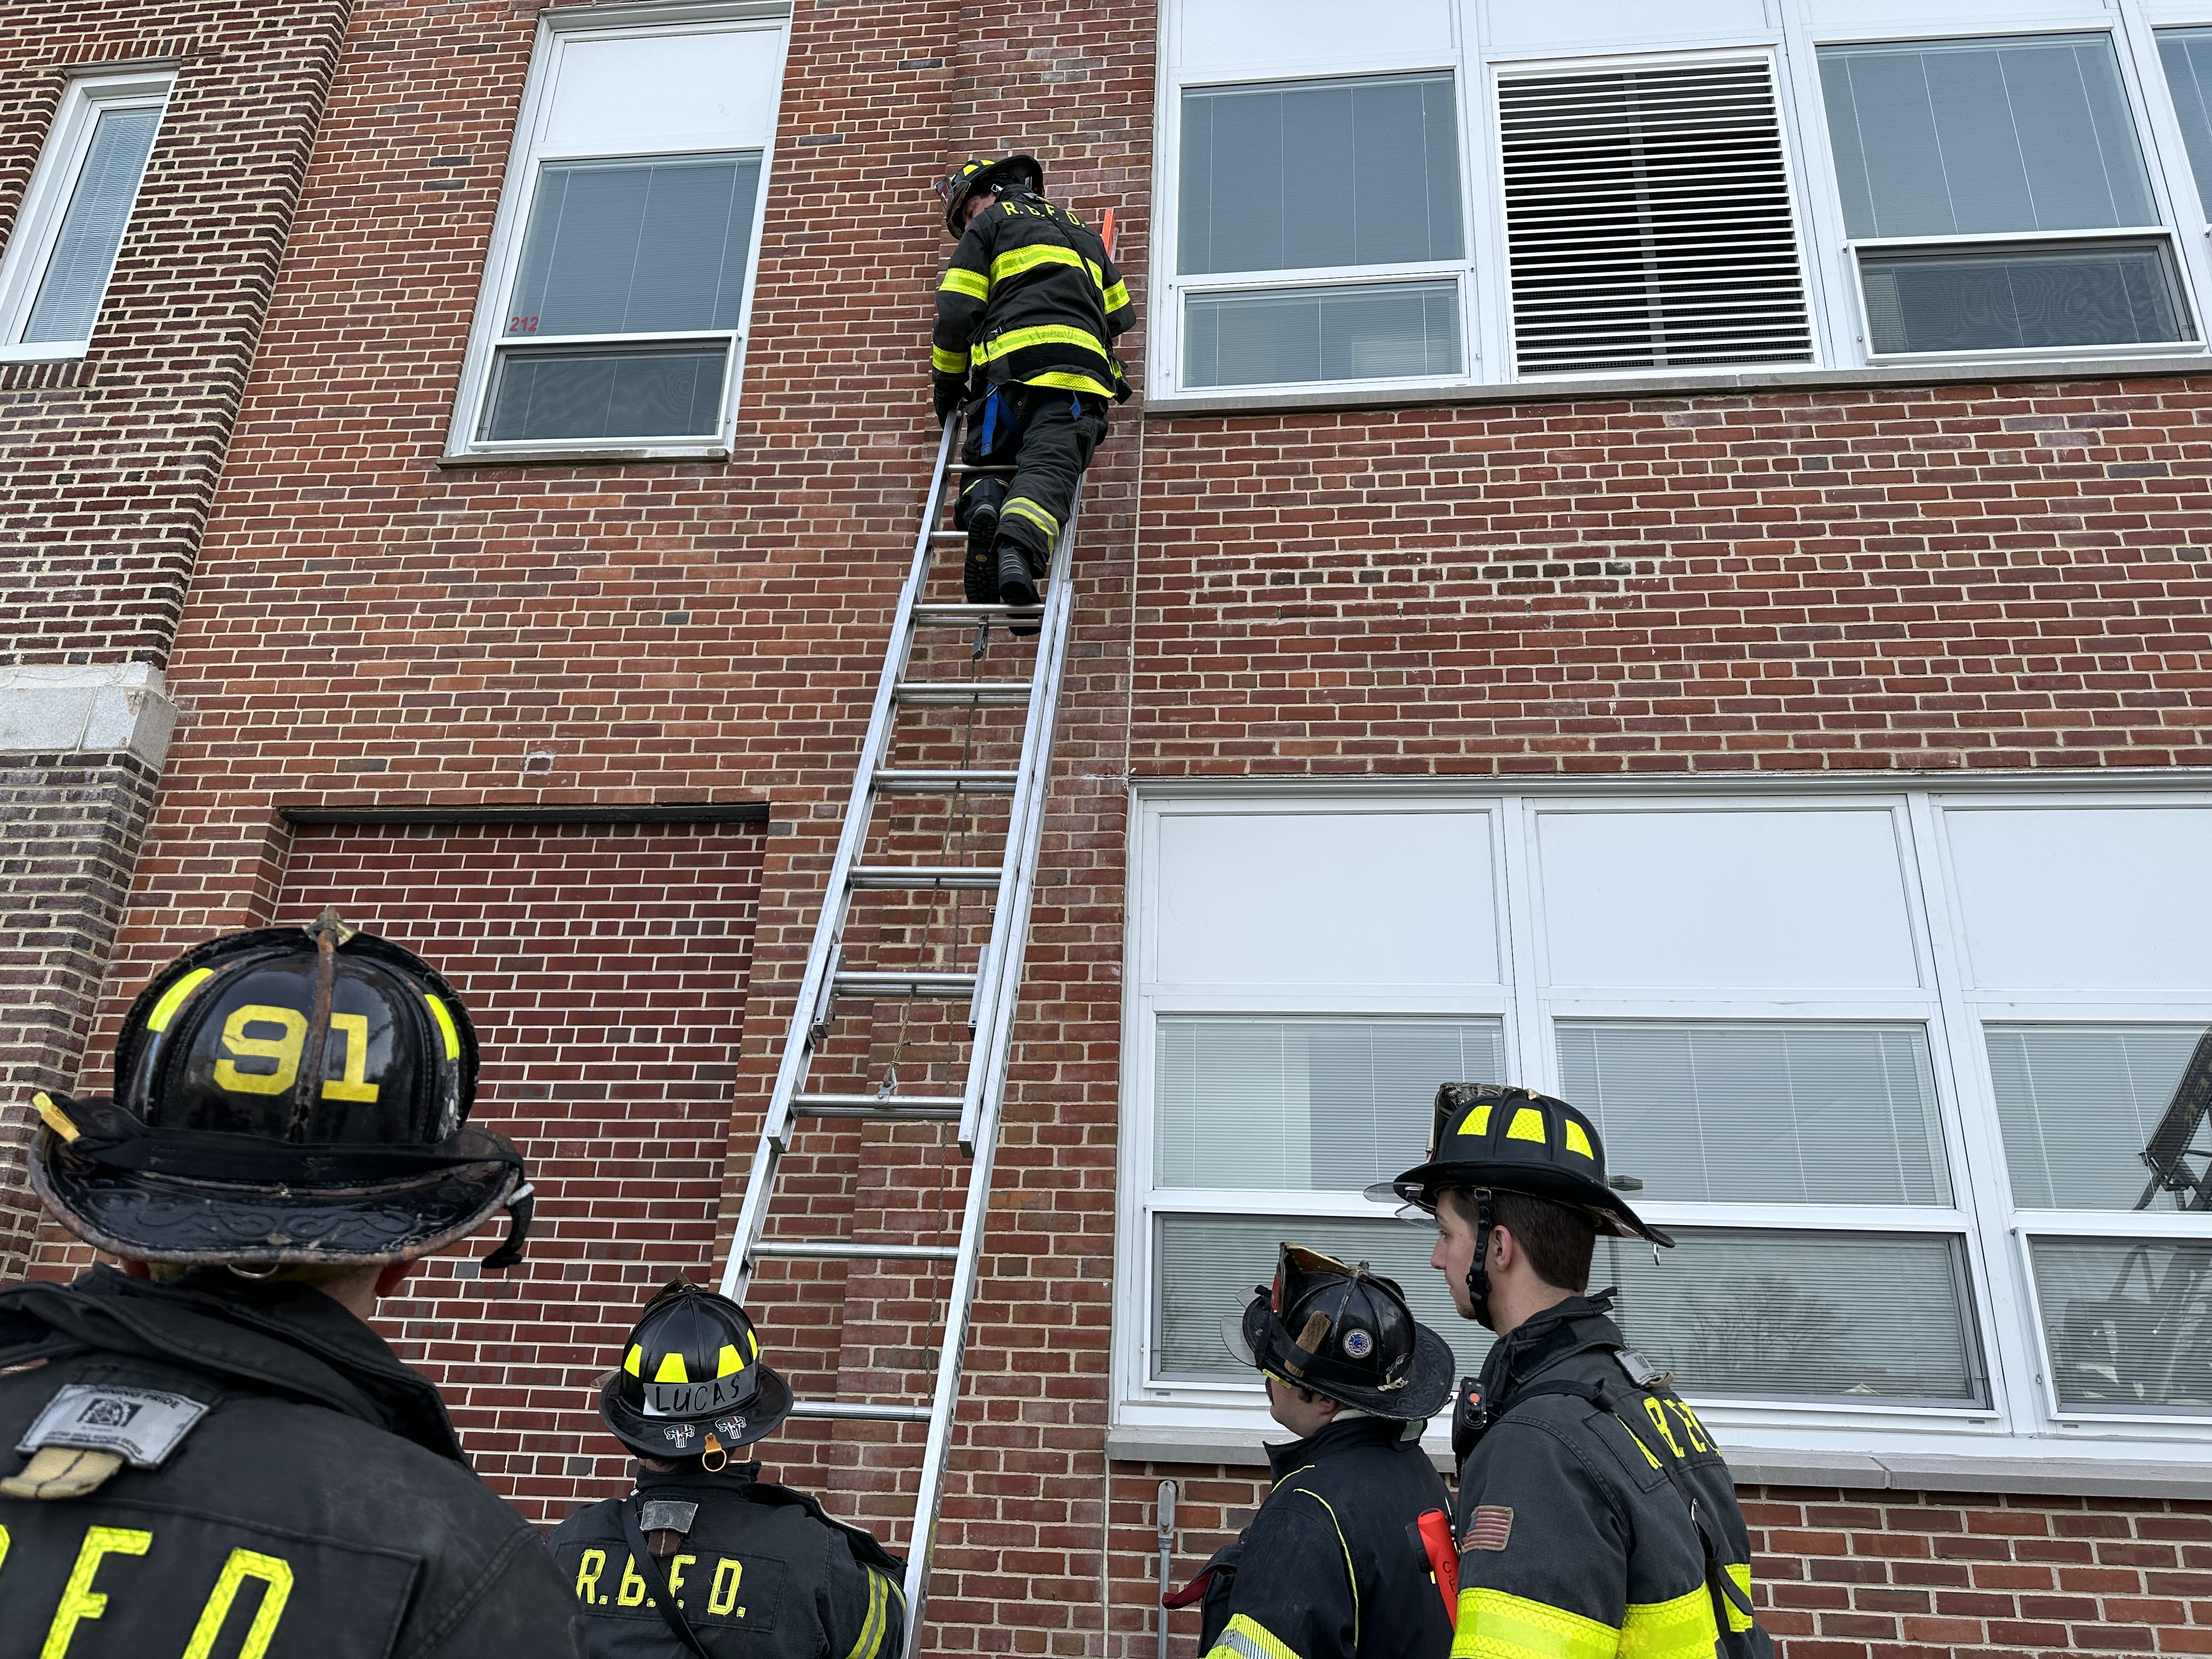 3/12 Ladder Placement Drill